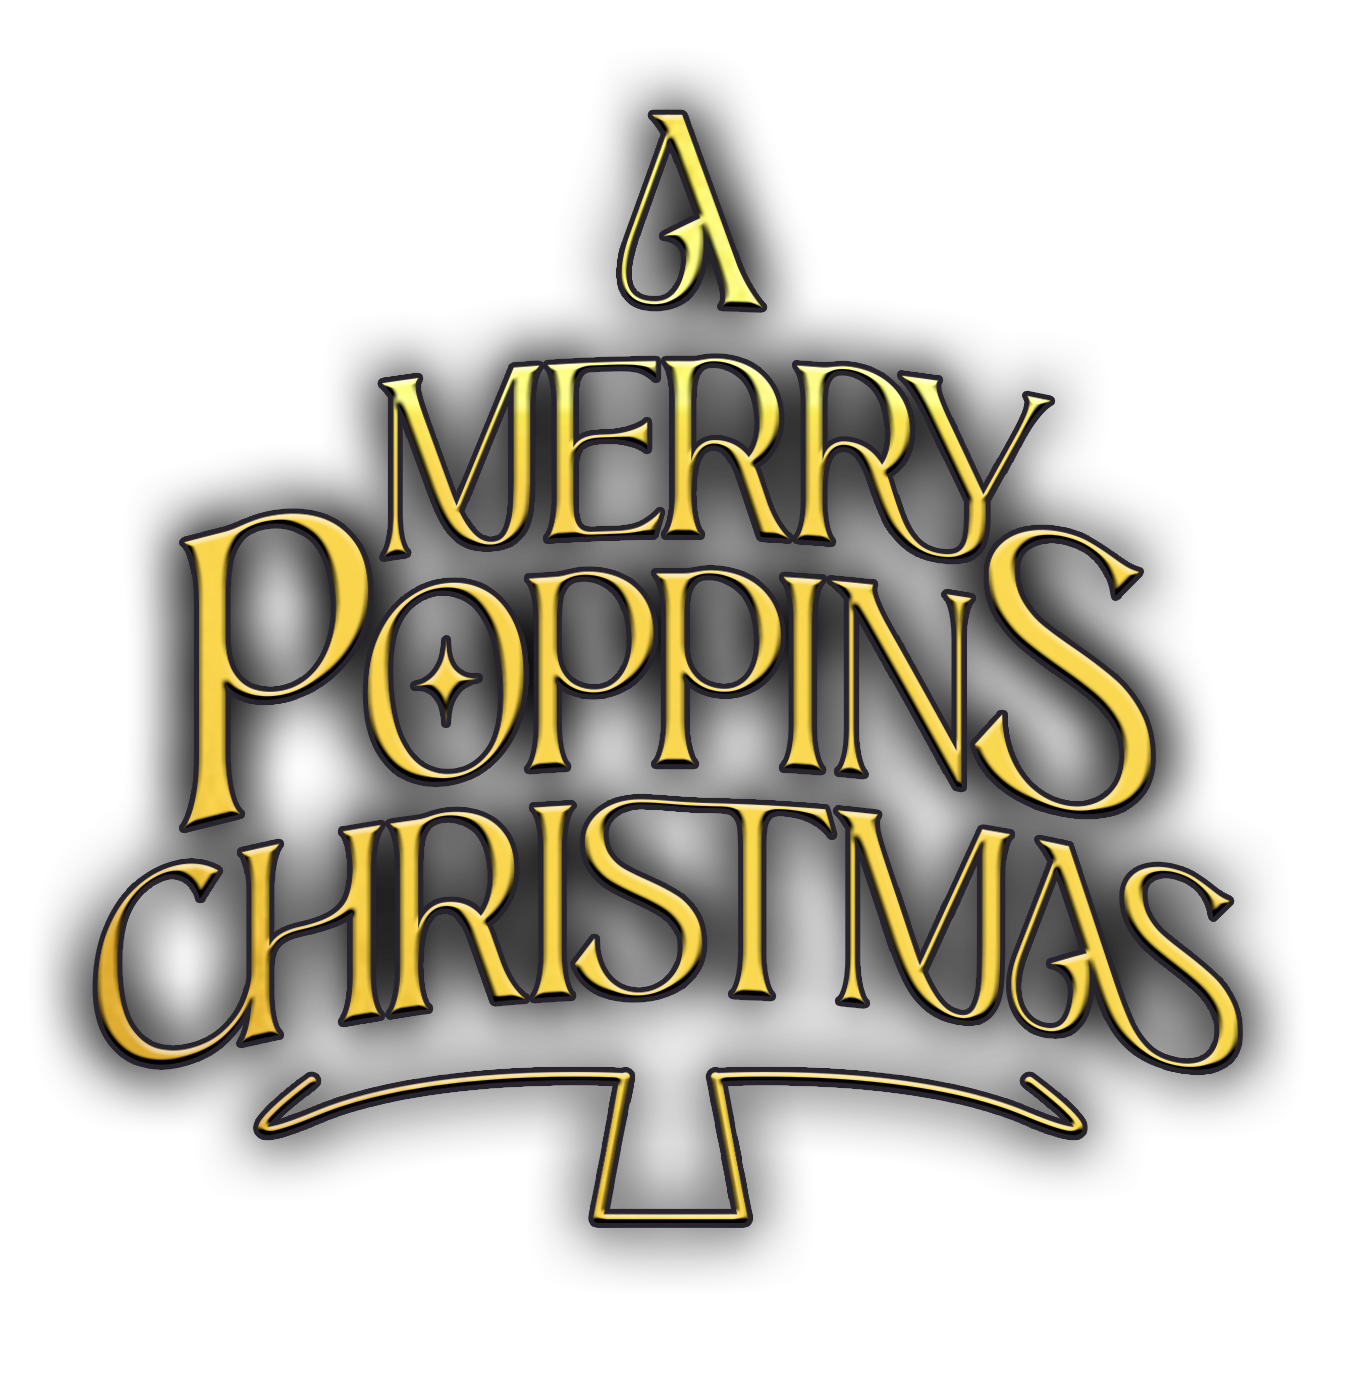 A Merry Poppins Christmas